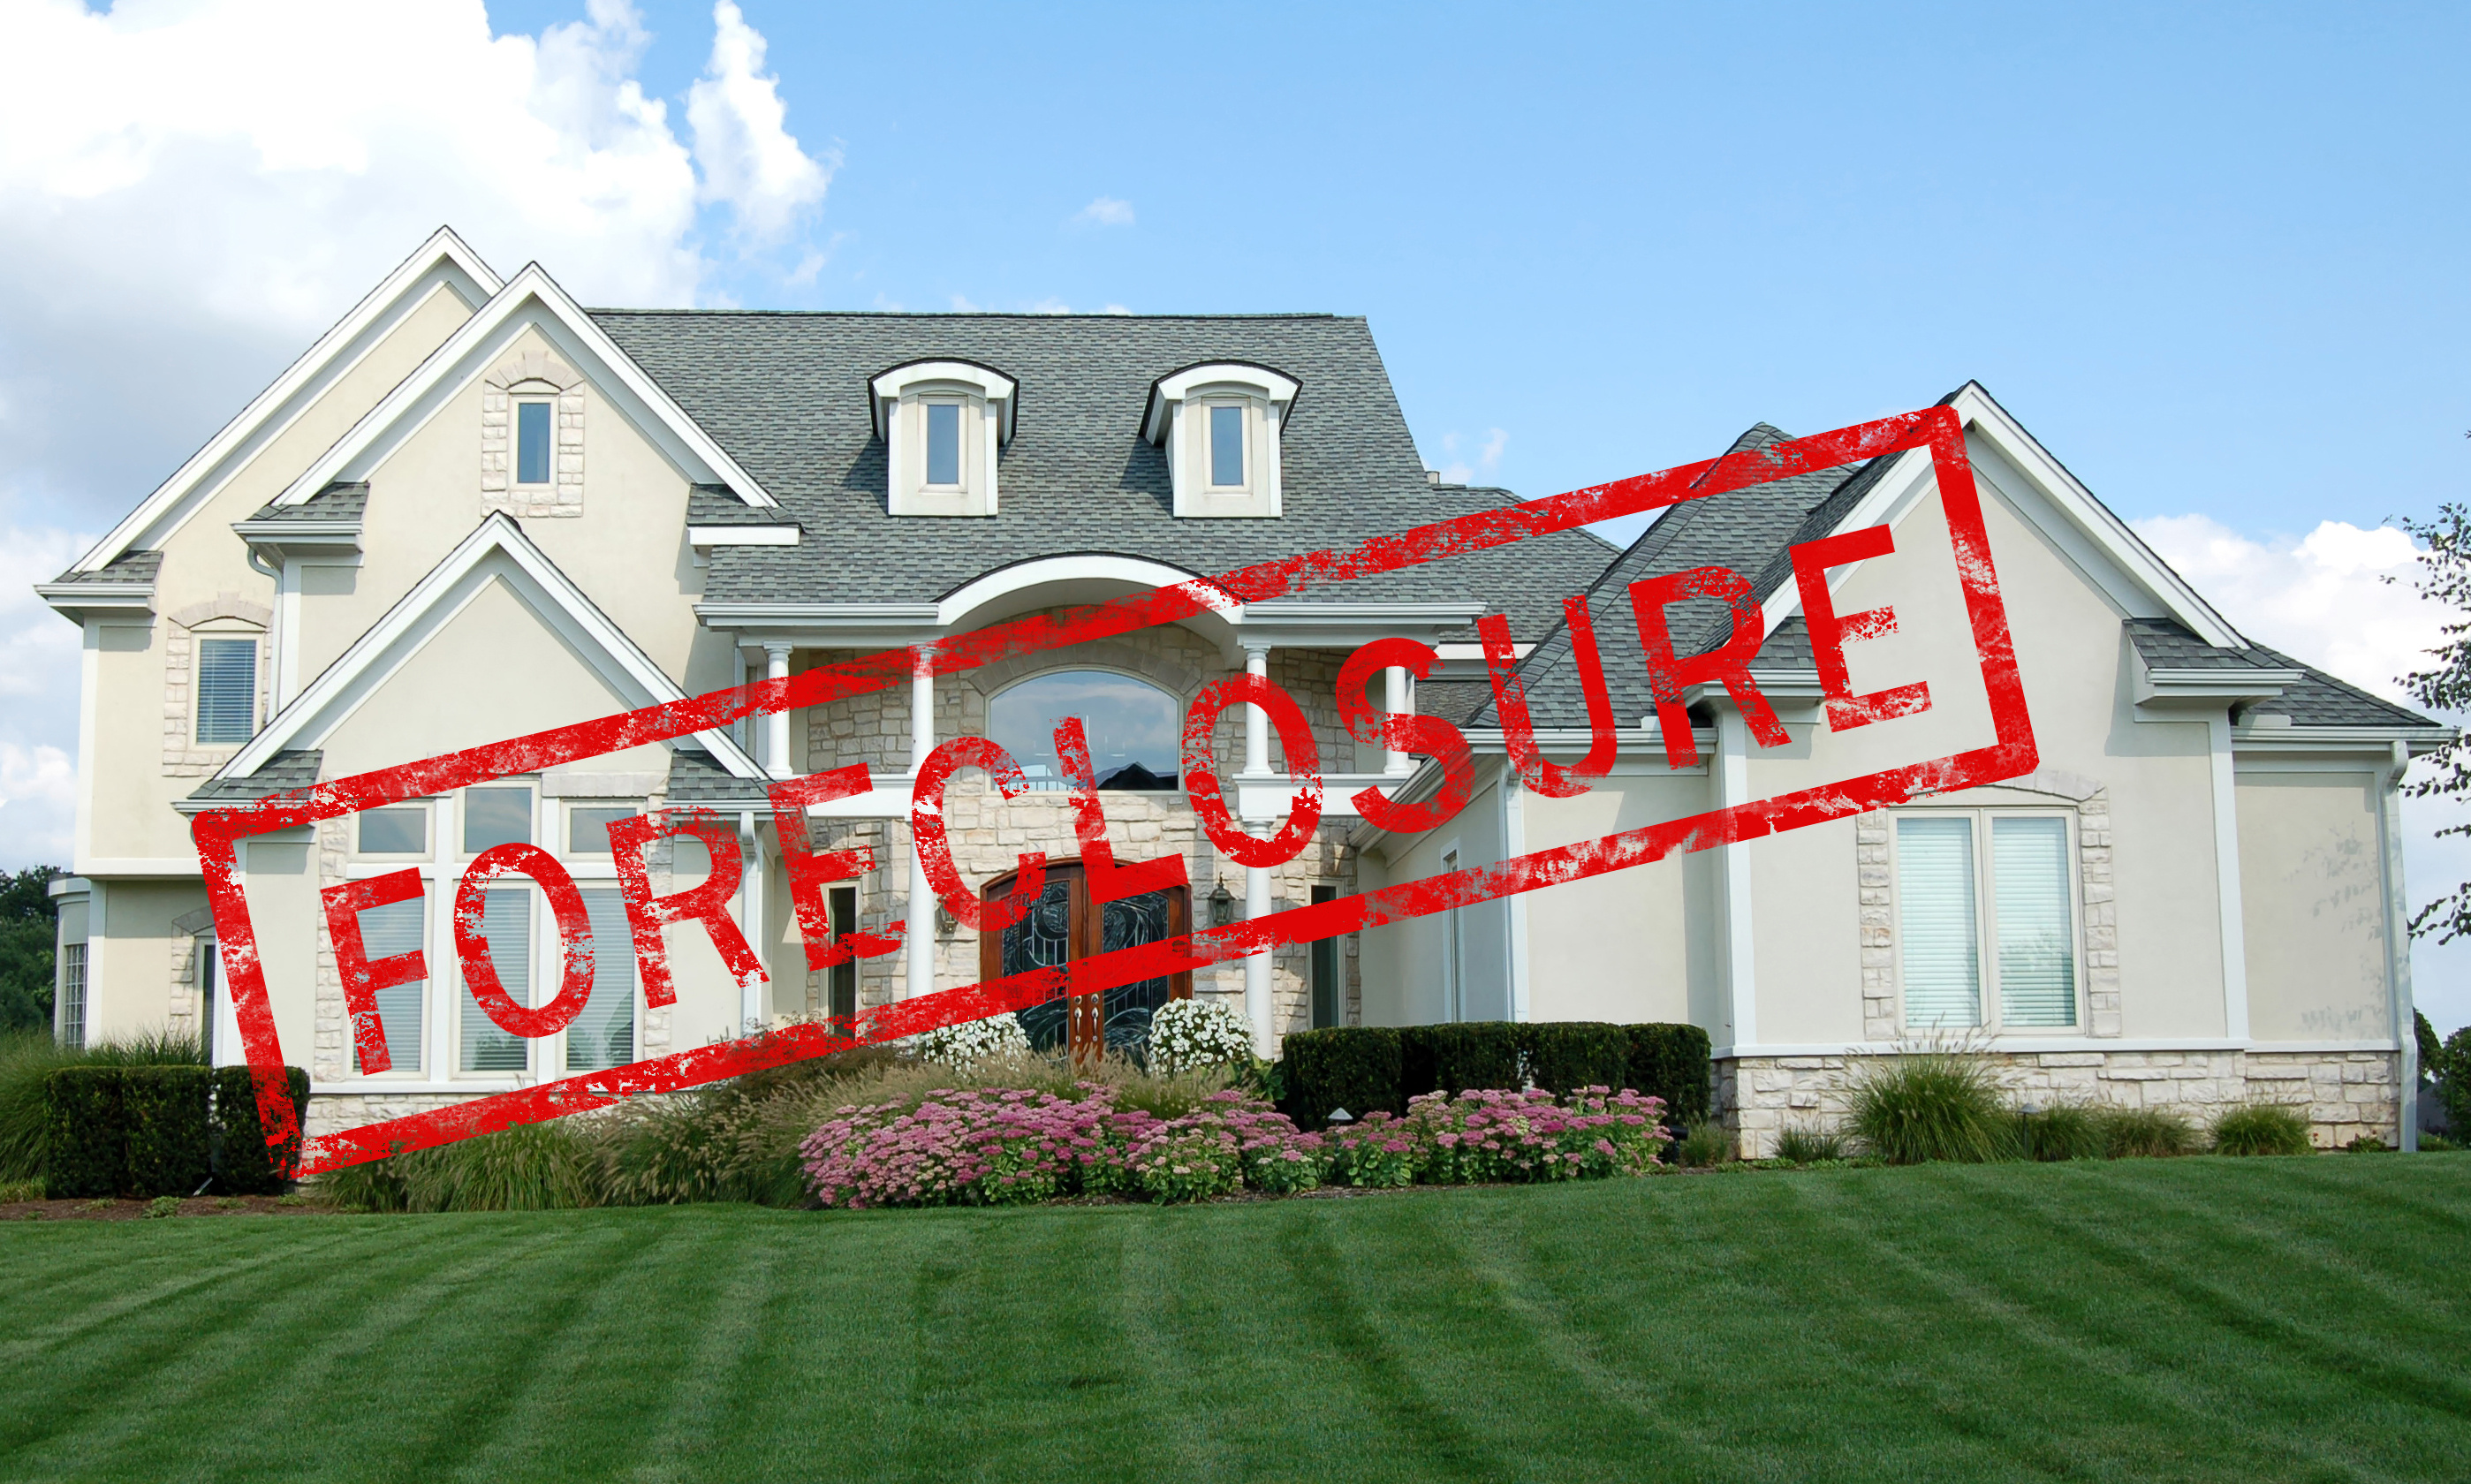 Call Island Preferred, Inc. when you need appraisals on Suffolk foreclosures